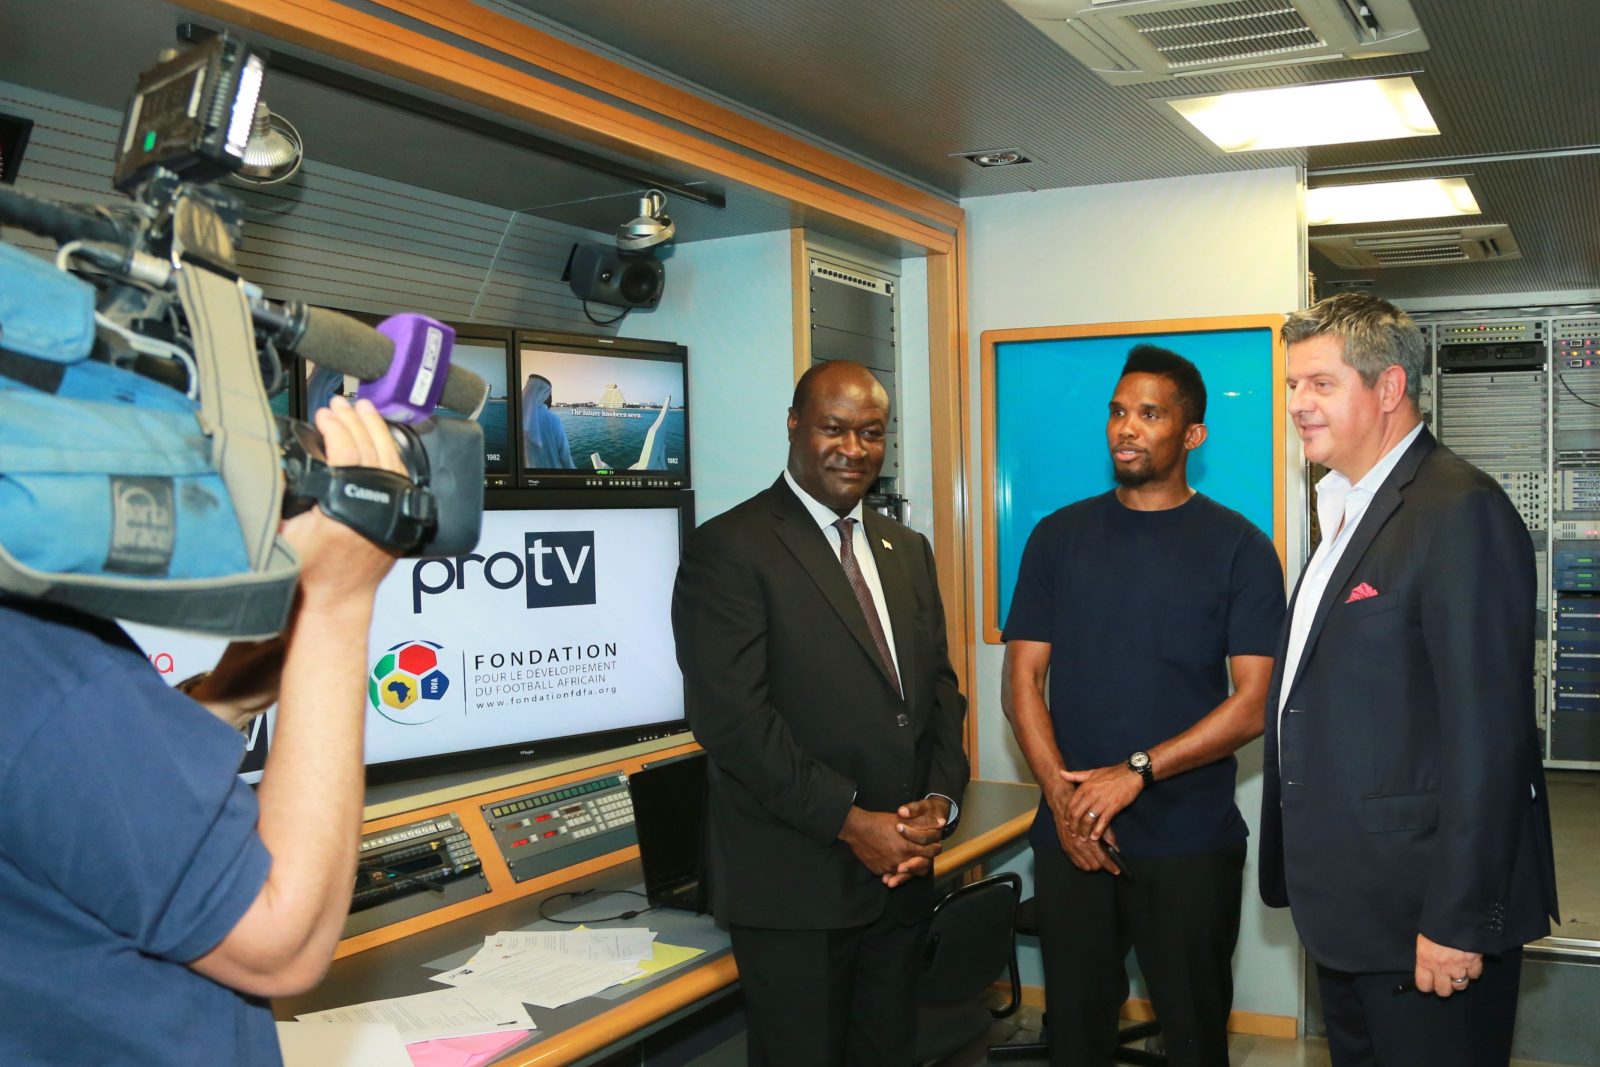 (from left to right): Mr. Christian LAGNIDE - General Manager of Foundation of African football (FDFA) Mr. Samuel ETOO - The official patron of the Partnership. Qatar Sports Club, former Barcelona FC Mr. Bernard PICHAUD – General manager PRO TV -beIN